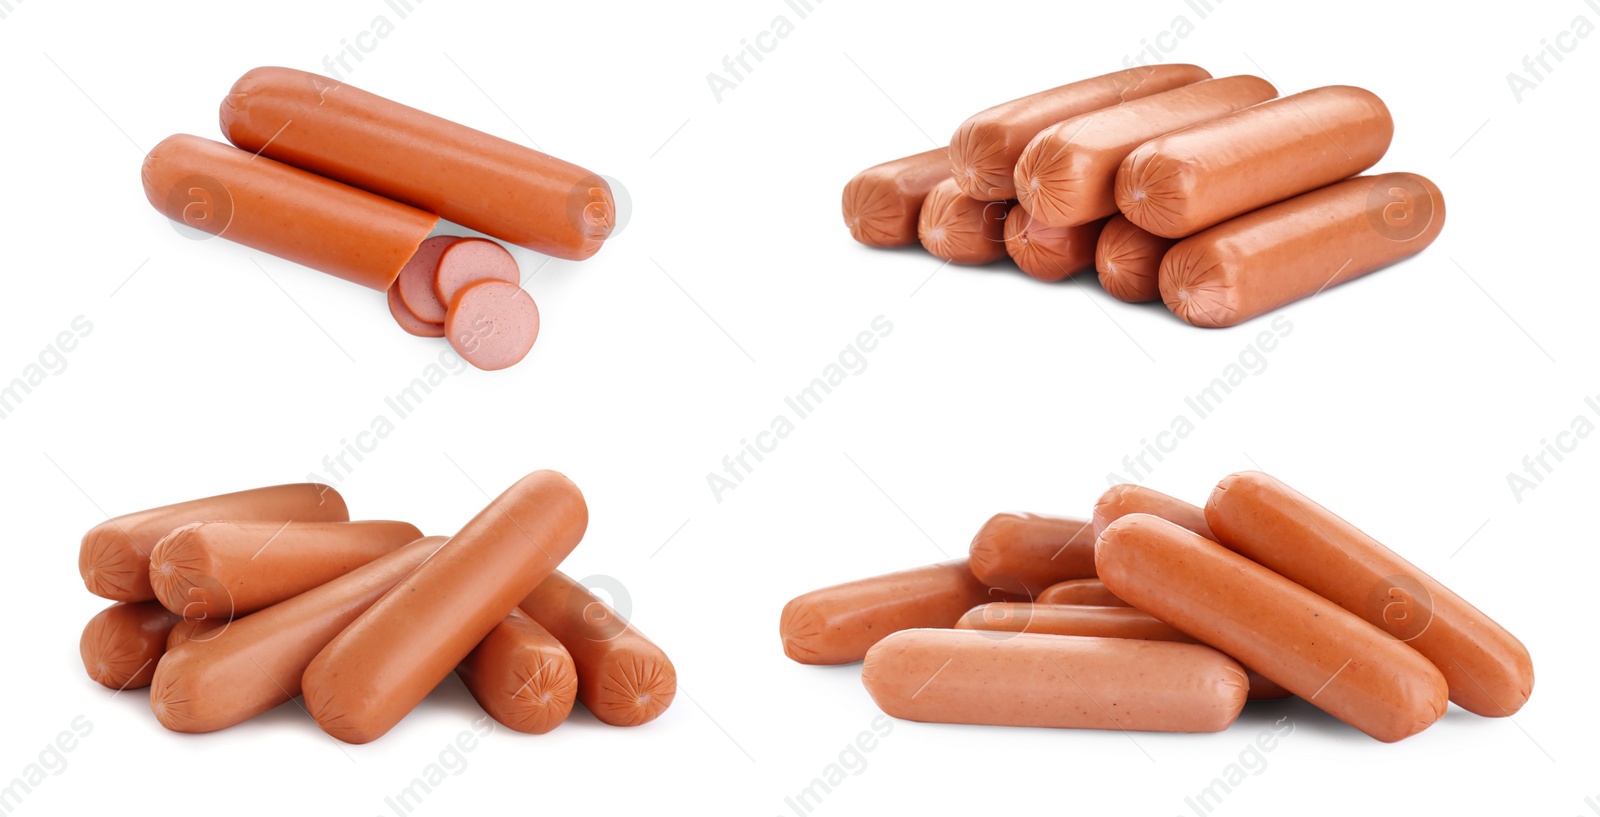 Image of Collage with fresh raw sausages on white background